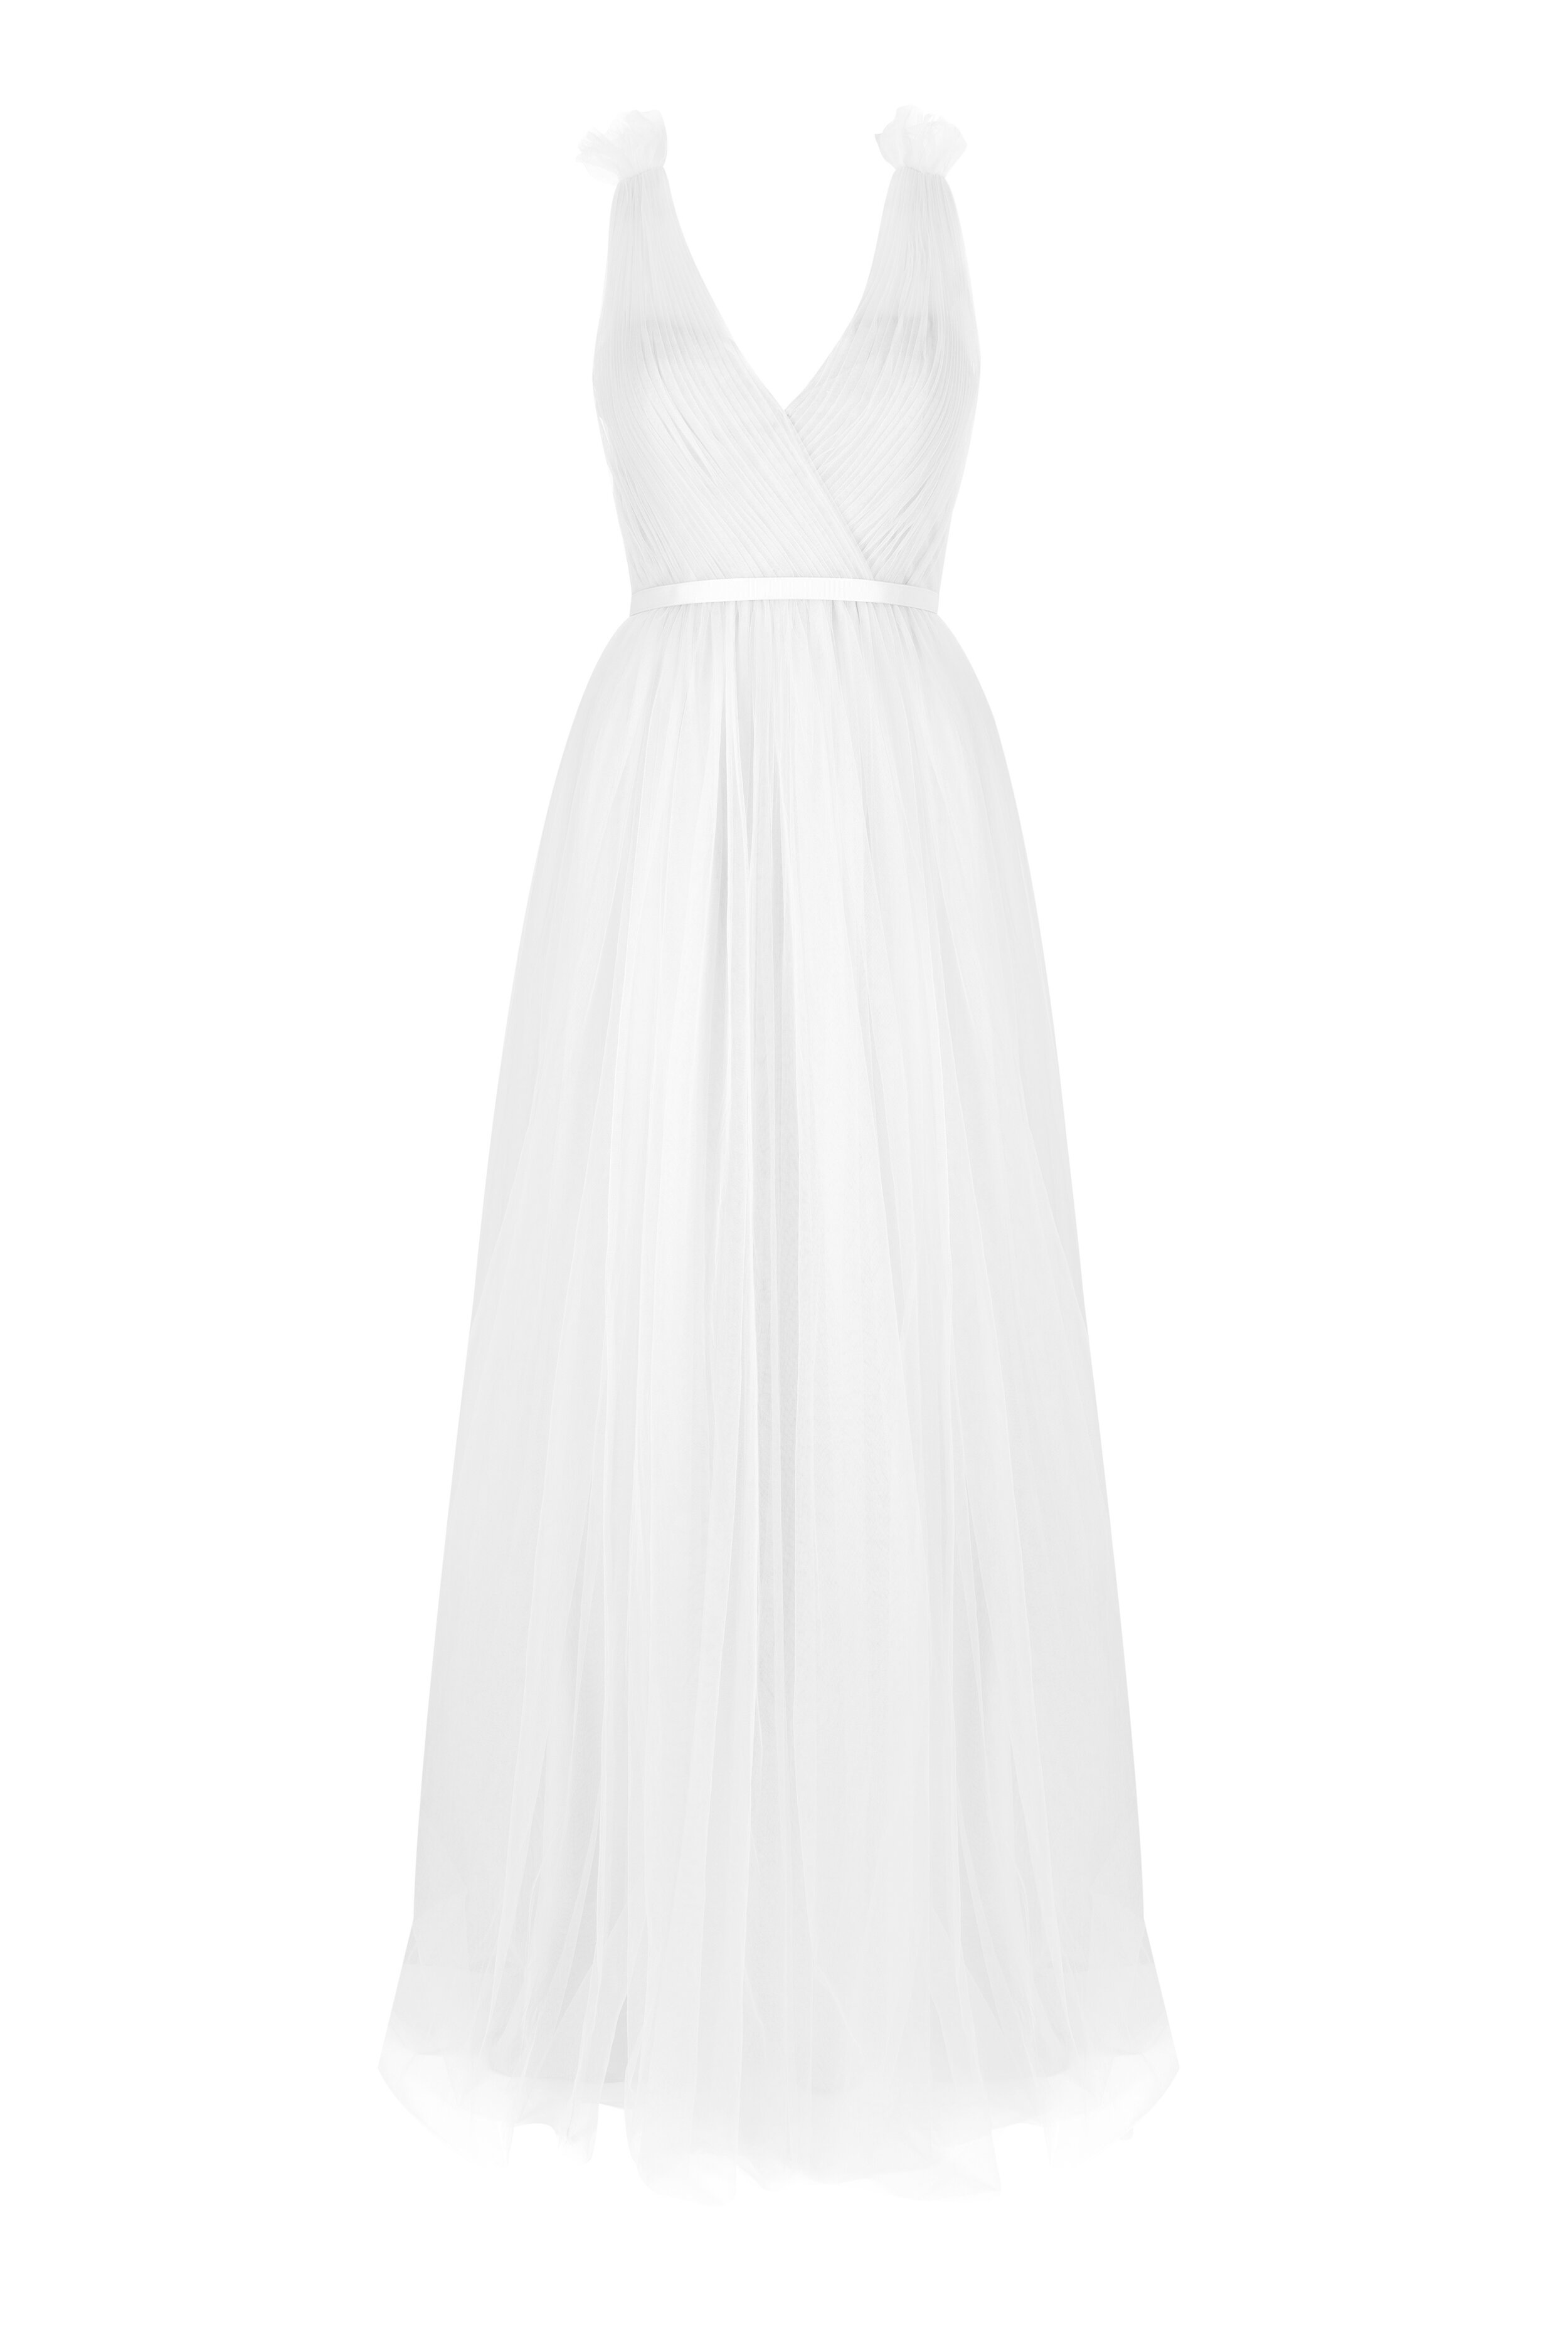 TH&TH Camilla, Crystal Beaded Ivory wedding dress with angel sleeves ...